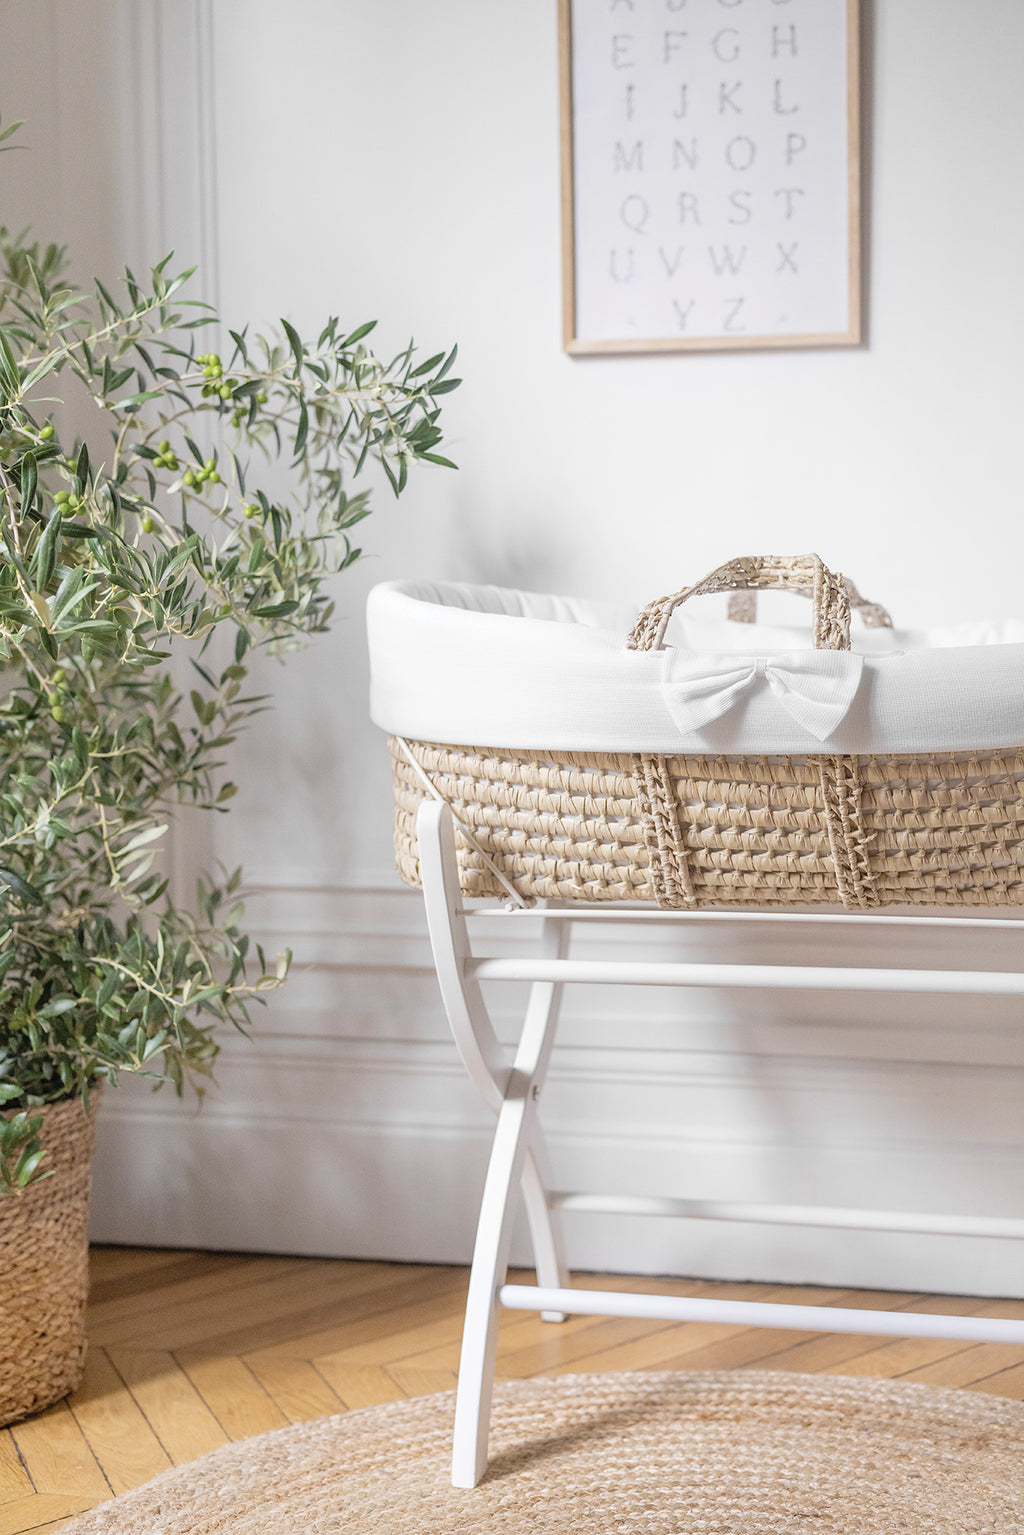 Moses basket - Palm leaves